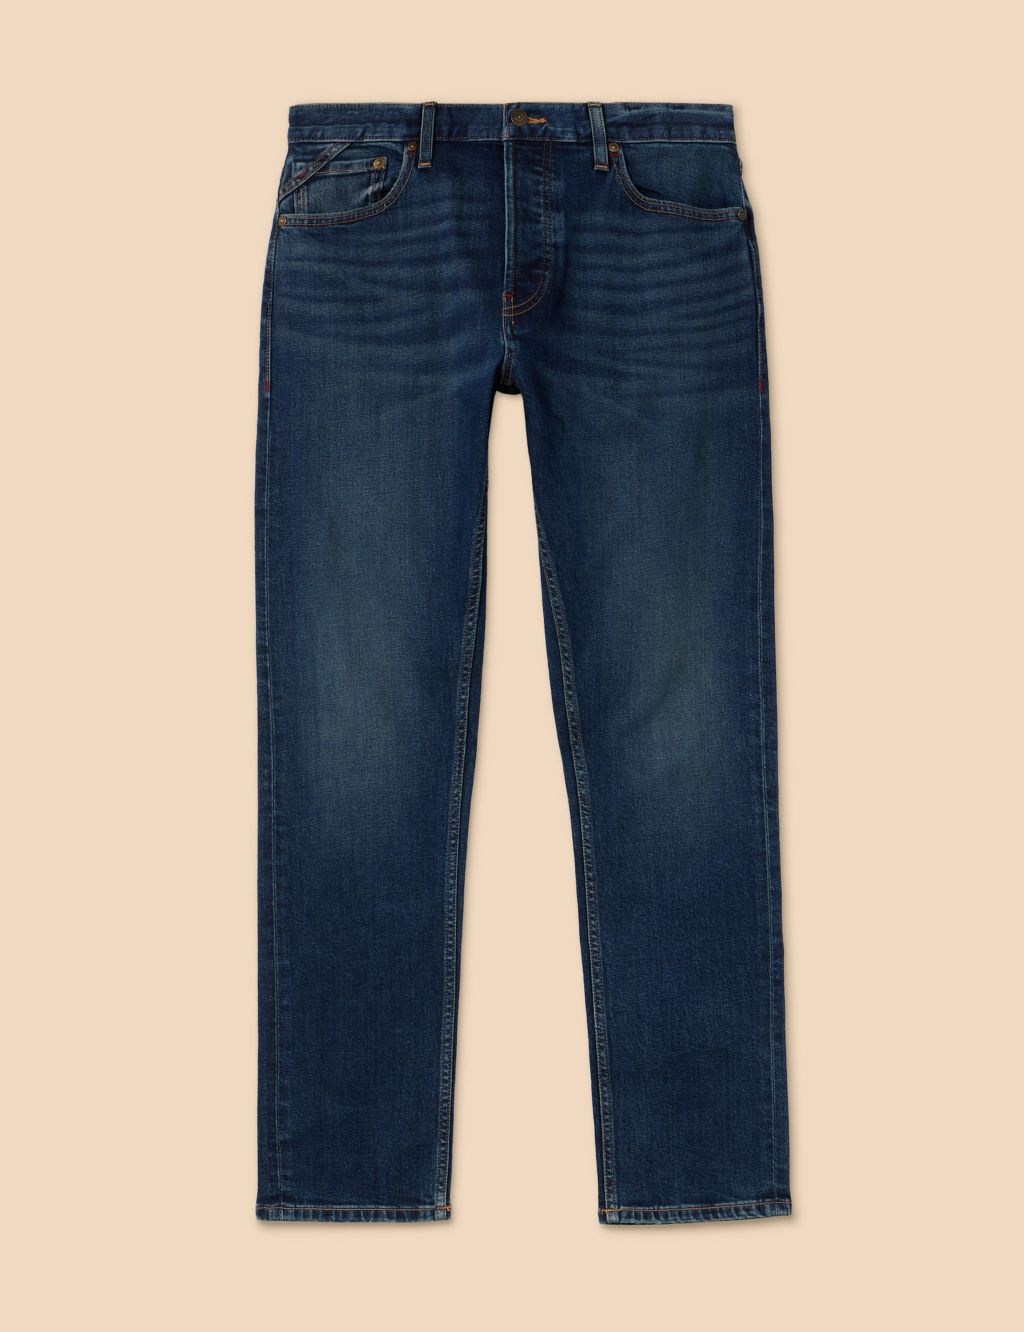 Straight Fit 5 Pocket Jeans image 2